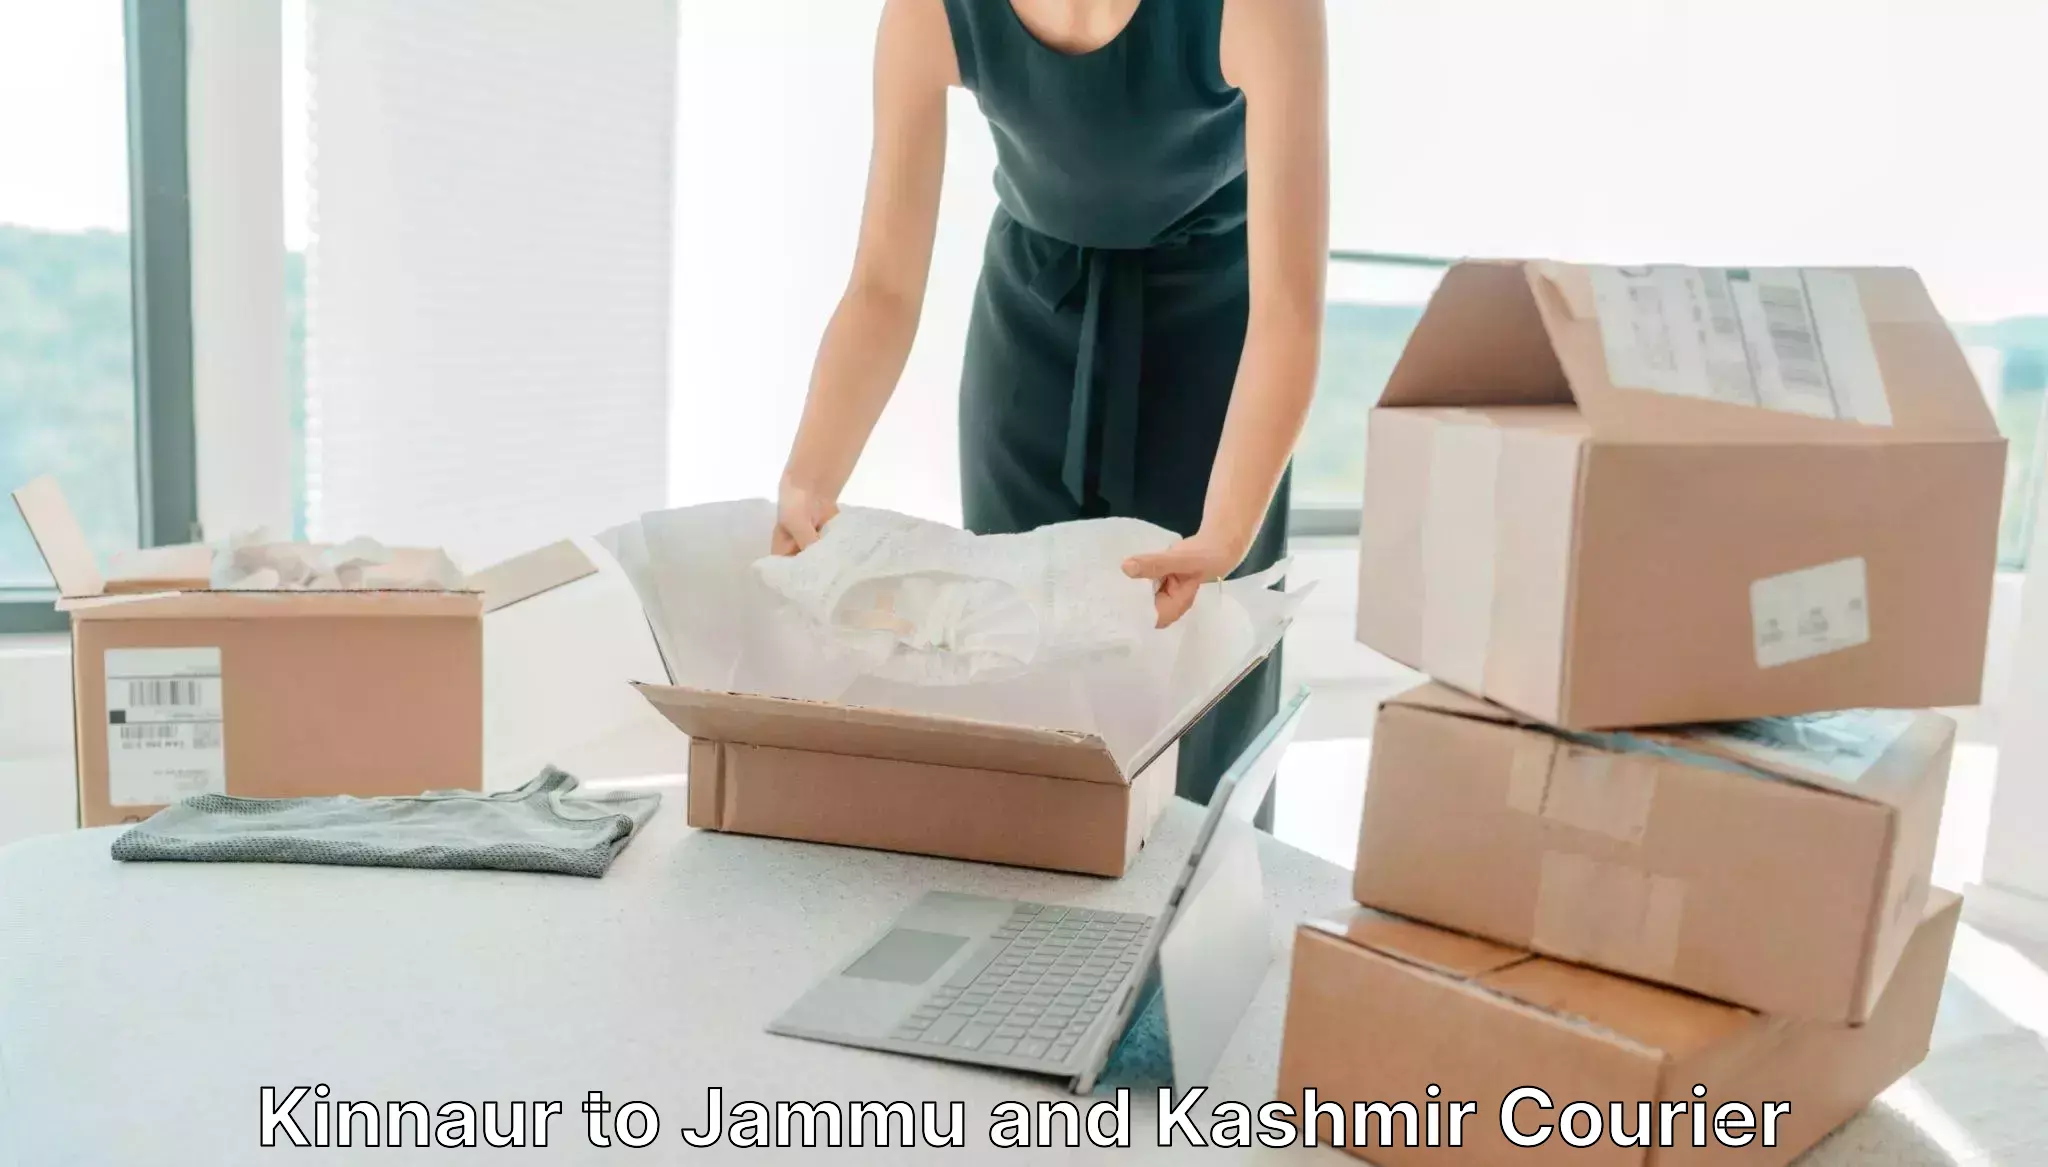 Customer-oriented courier services Kinnaur to Nagrota